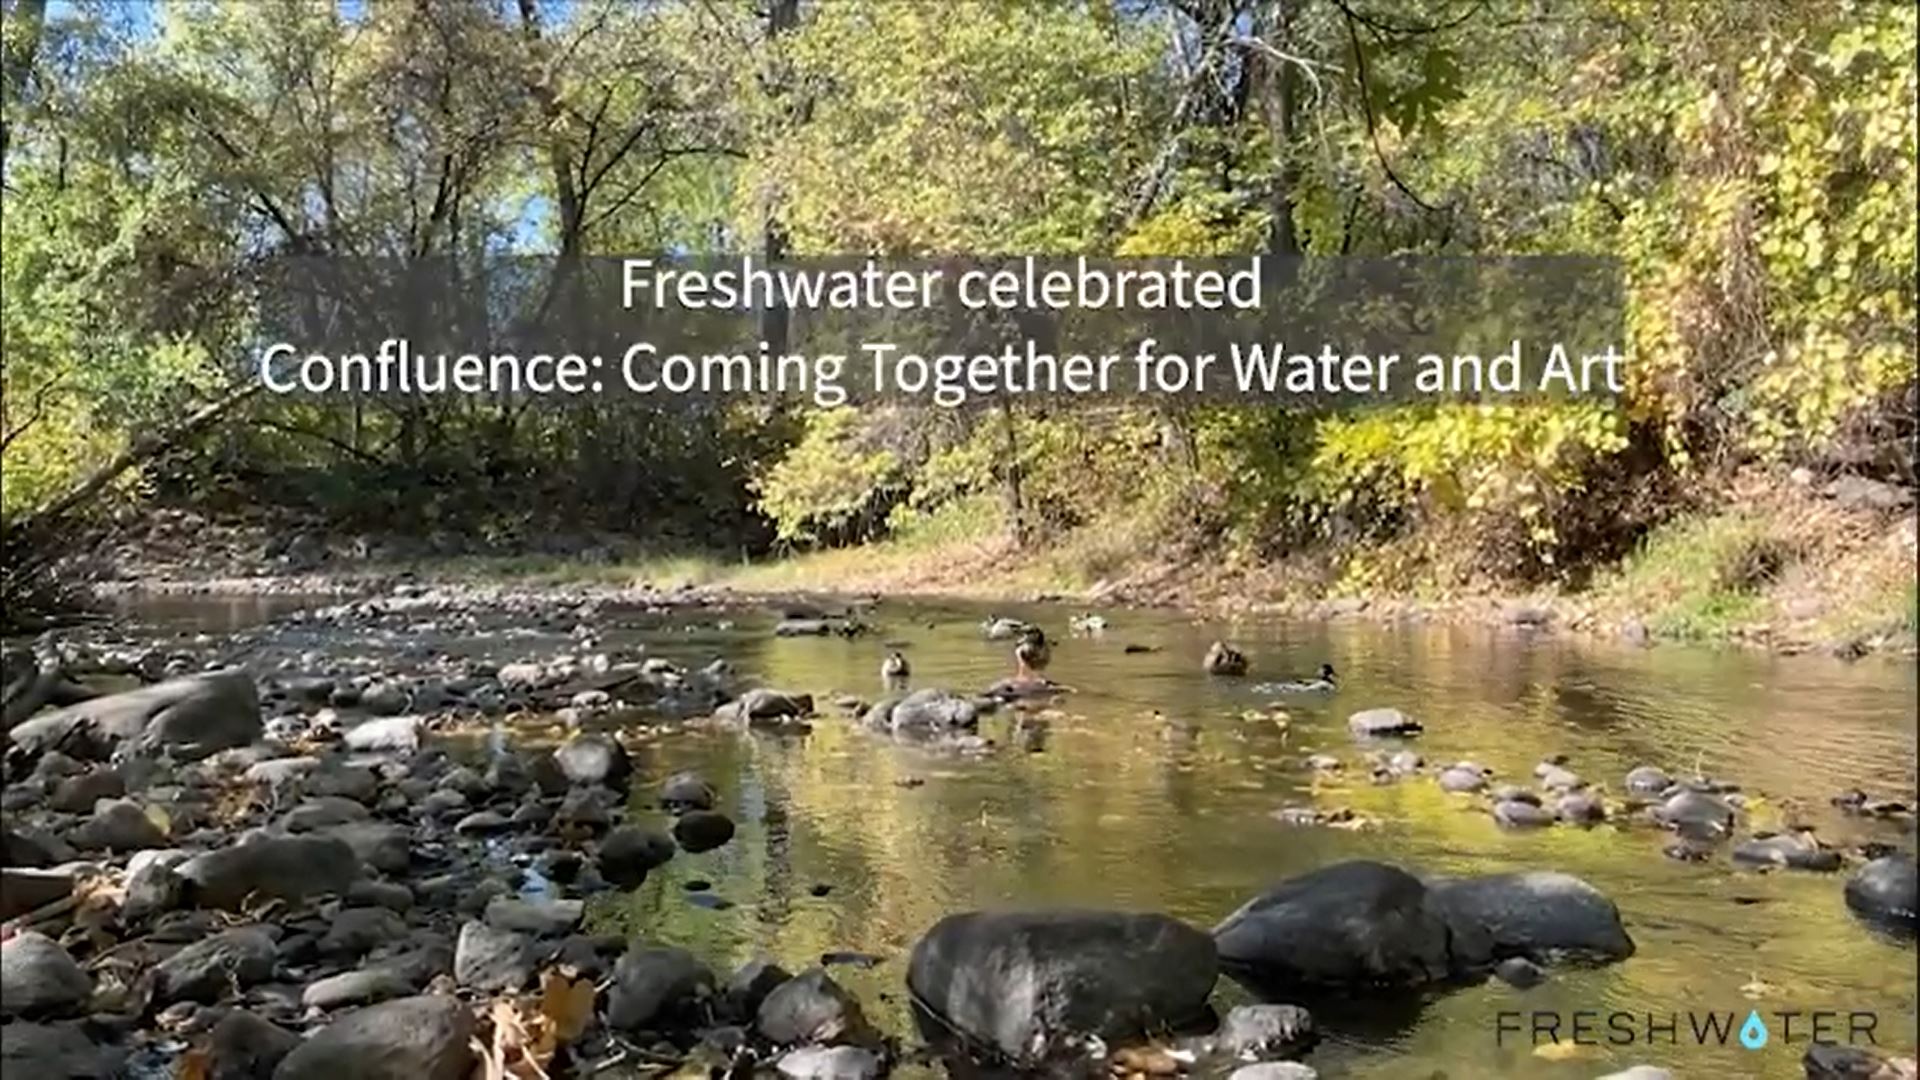 Freshwater celebrated Confluence: Coming Together for Water and Art